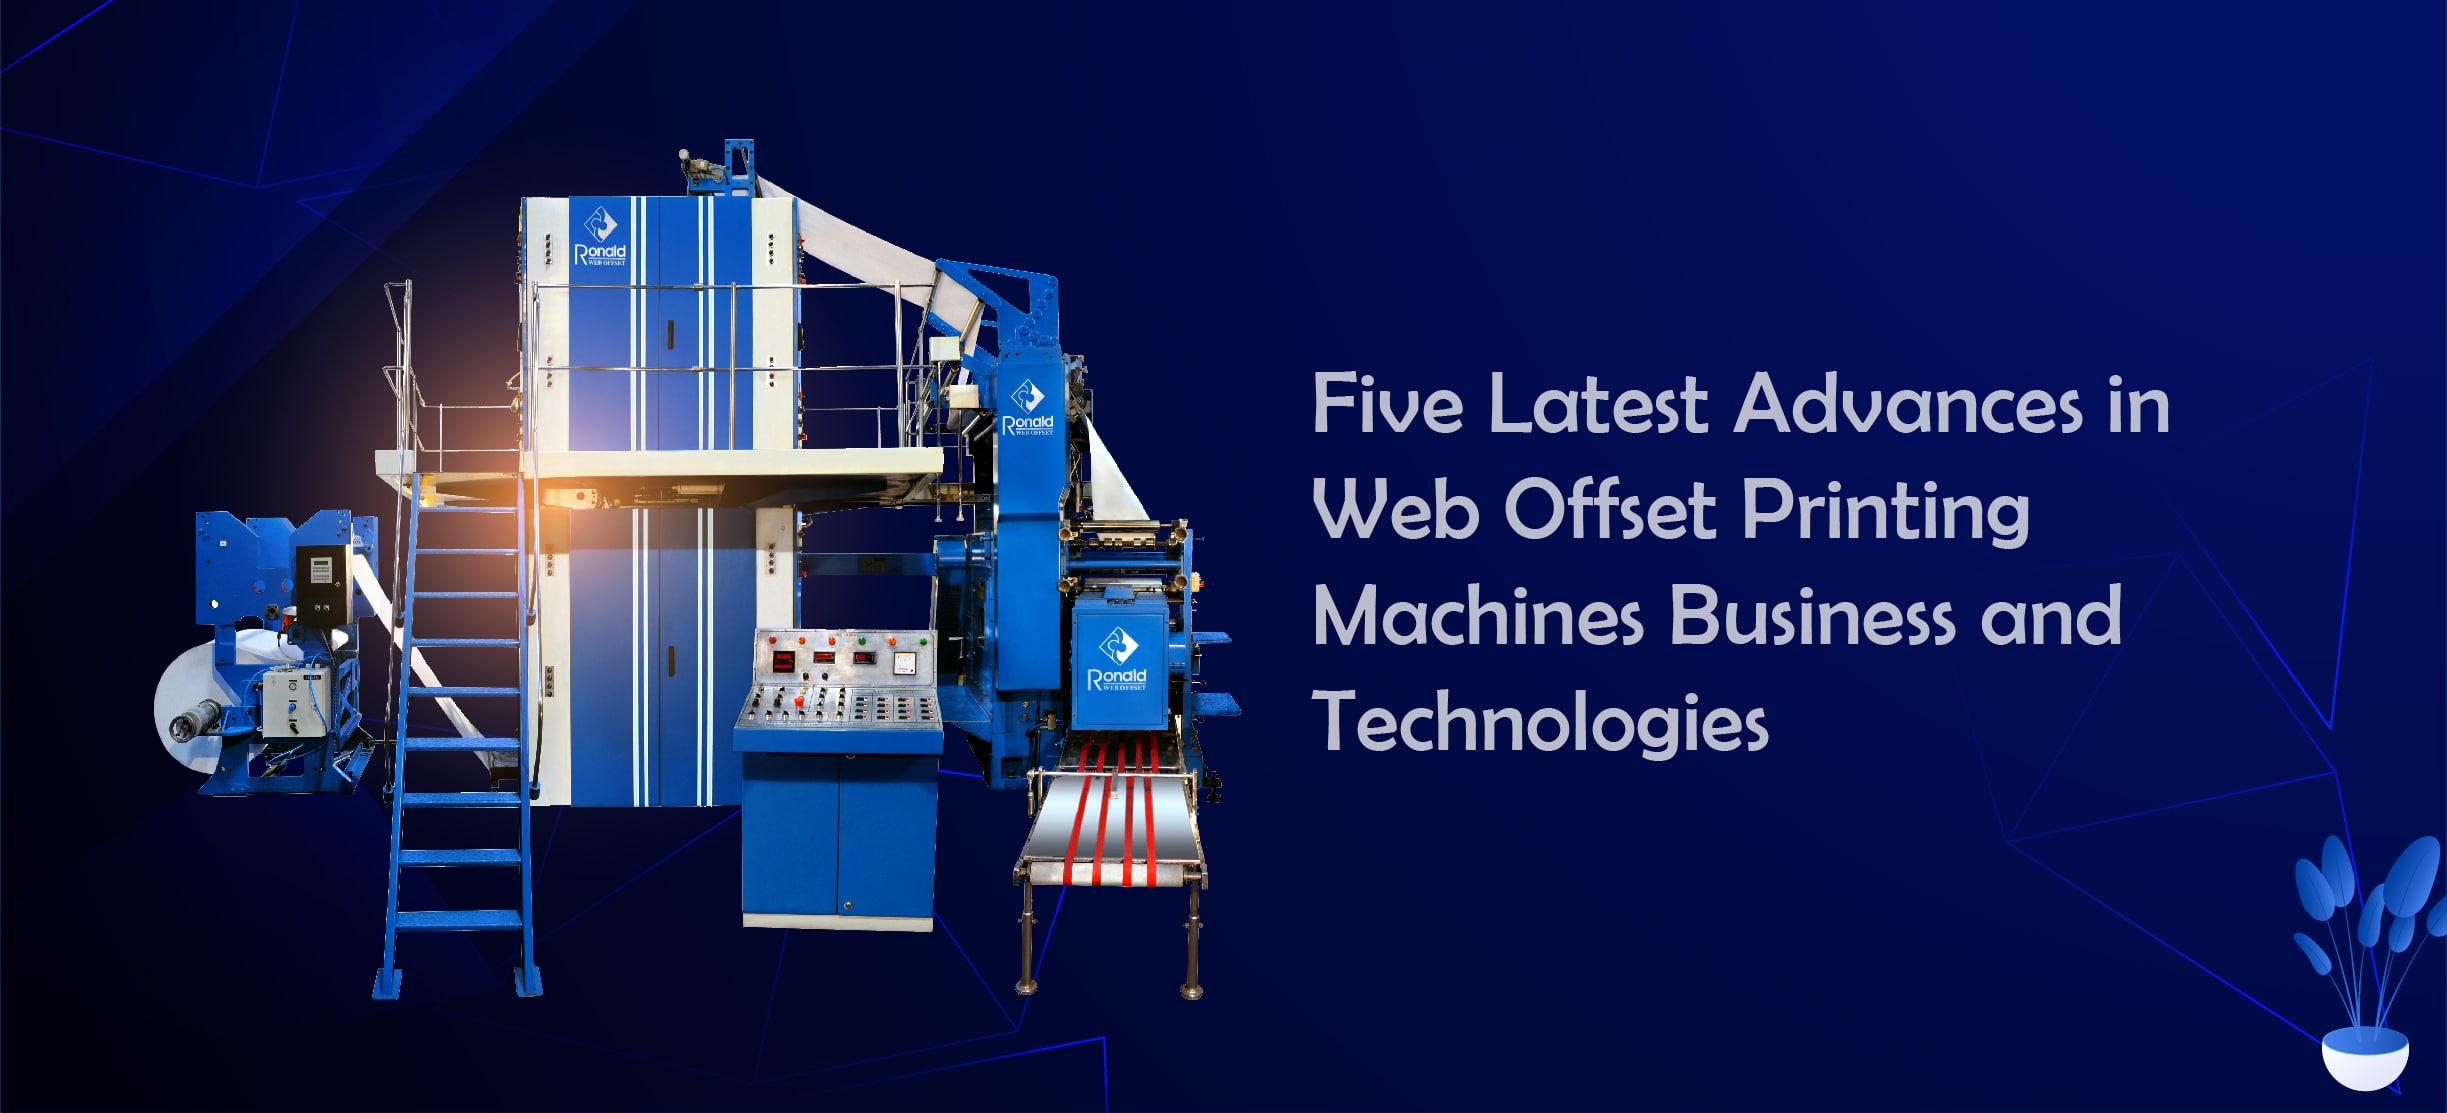 Five Latest Advances in Web Offset Printing Machines Business and Technologies